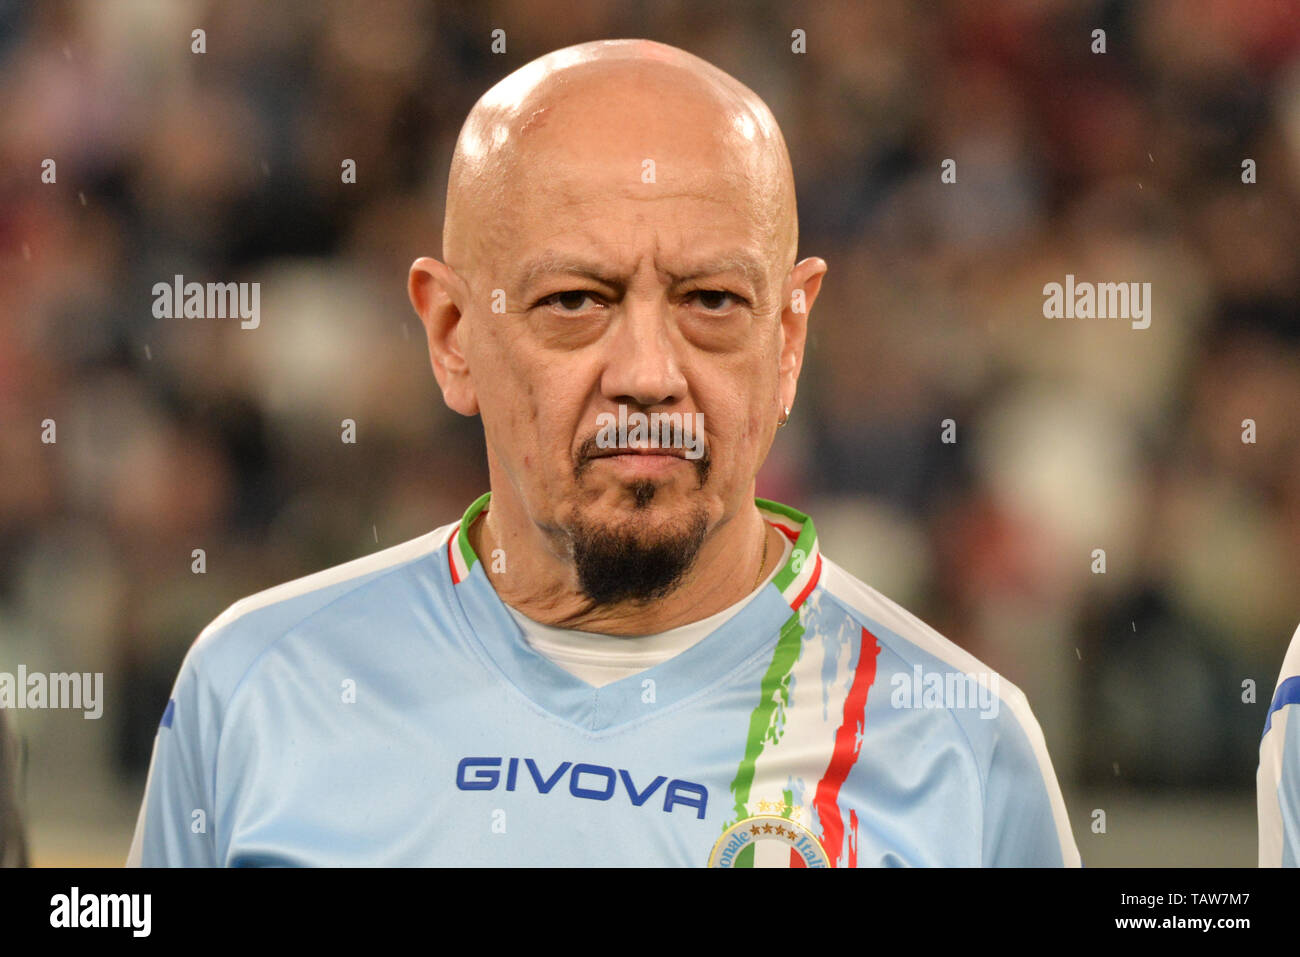 Turin, Italy. 28th May, 2019. Enrico Ruggeri of Italian National Singers seen during the 'Partita Del Cuore' Charity Match at Allianz Stadium. Campioni Per La Ricerca win the 'Champions for Research' 3-2 against the 'Italian National Singers'. Credit: SOPA Images Limited/Alamy Live News Stock Photo